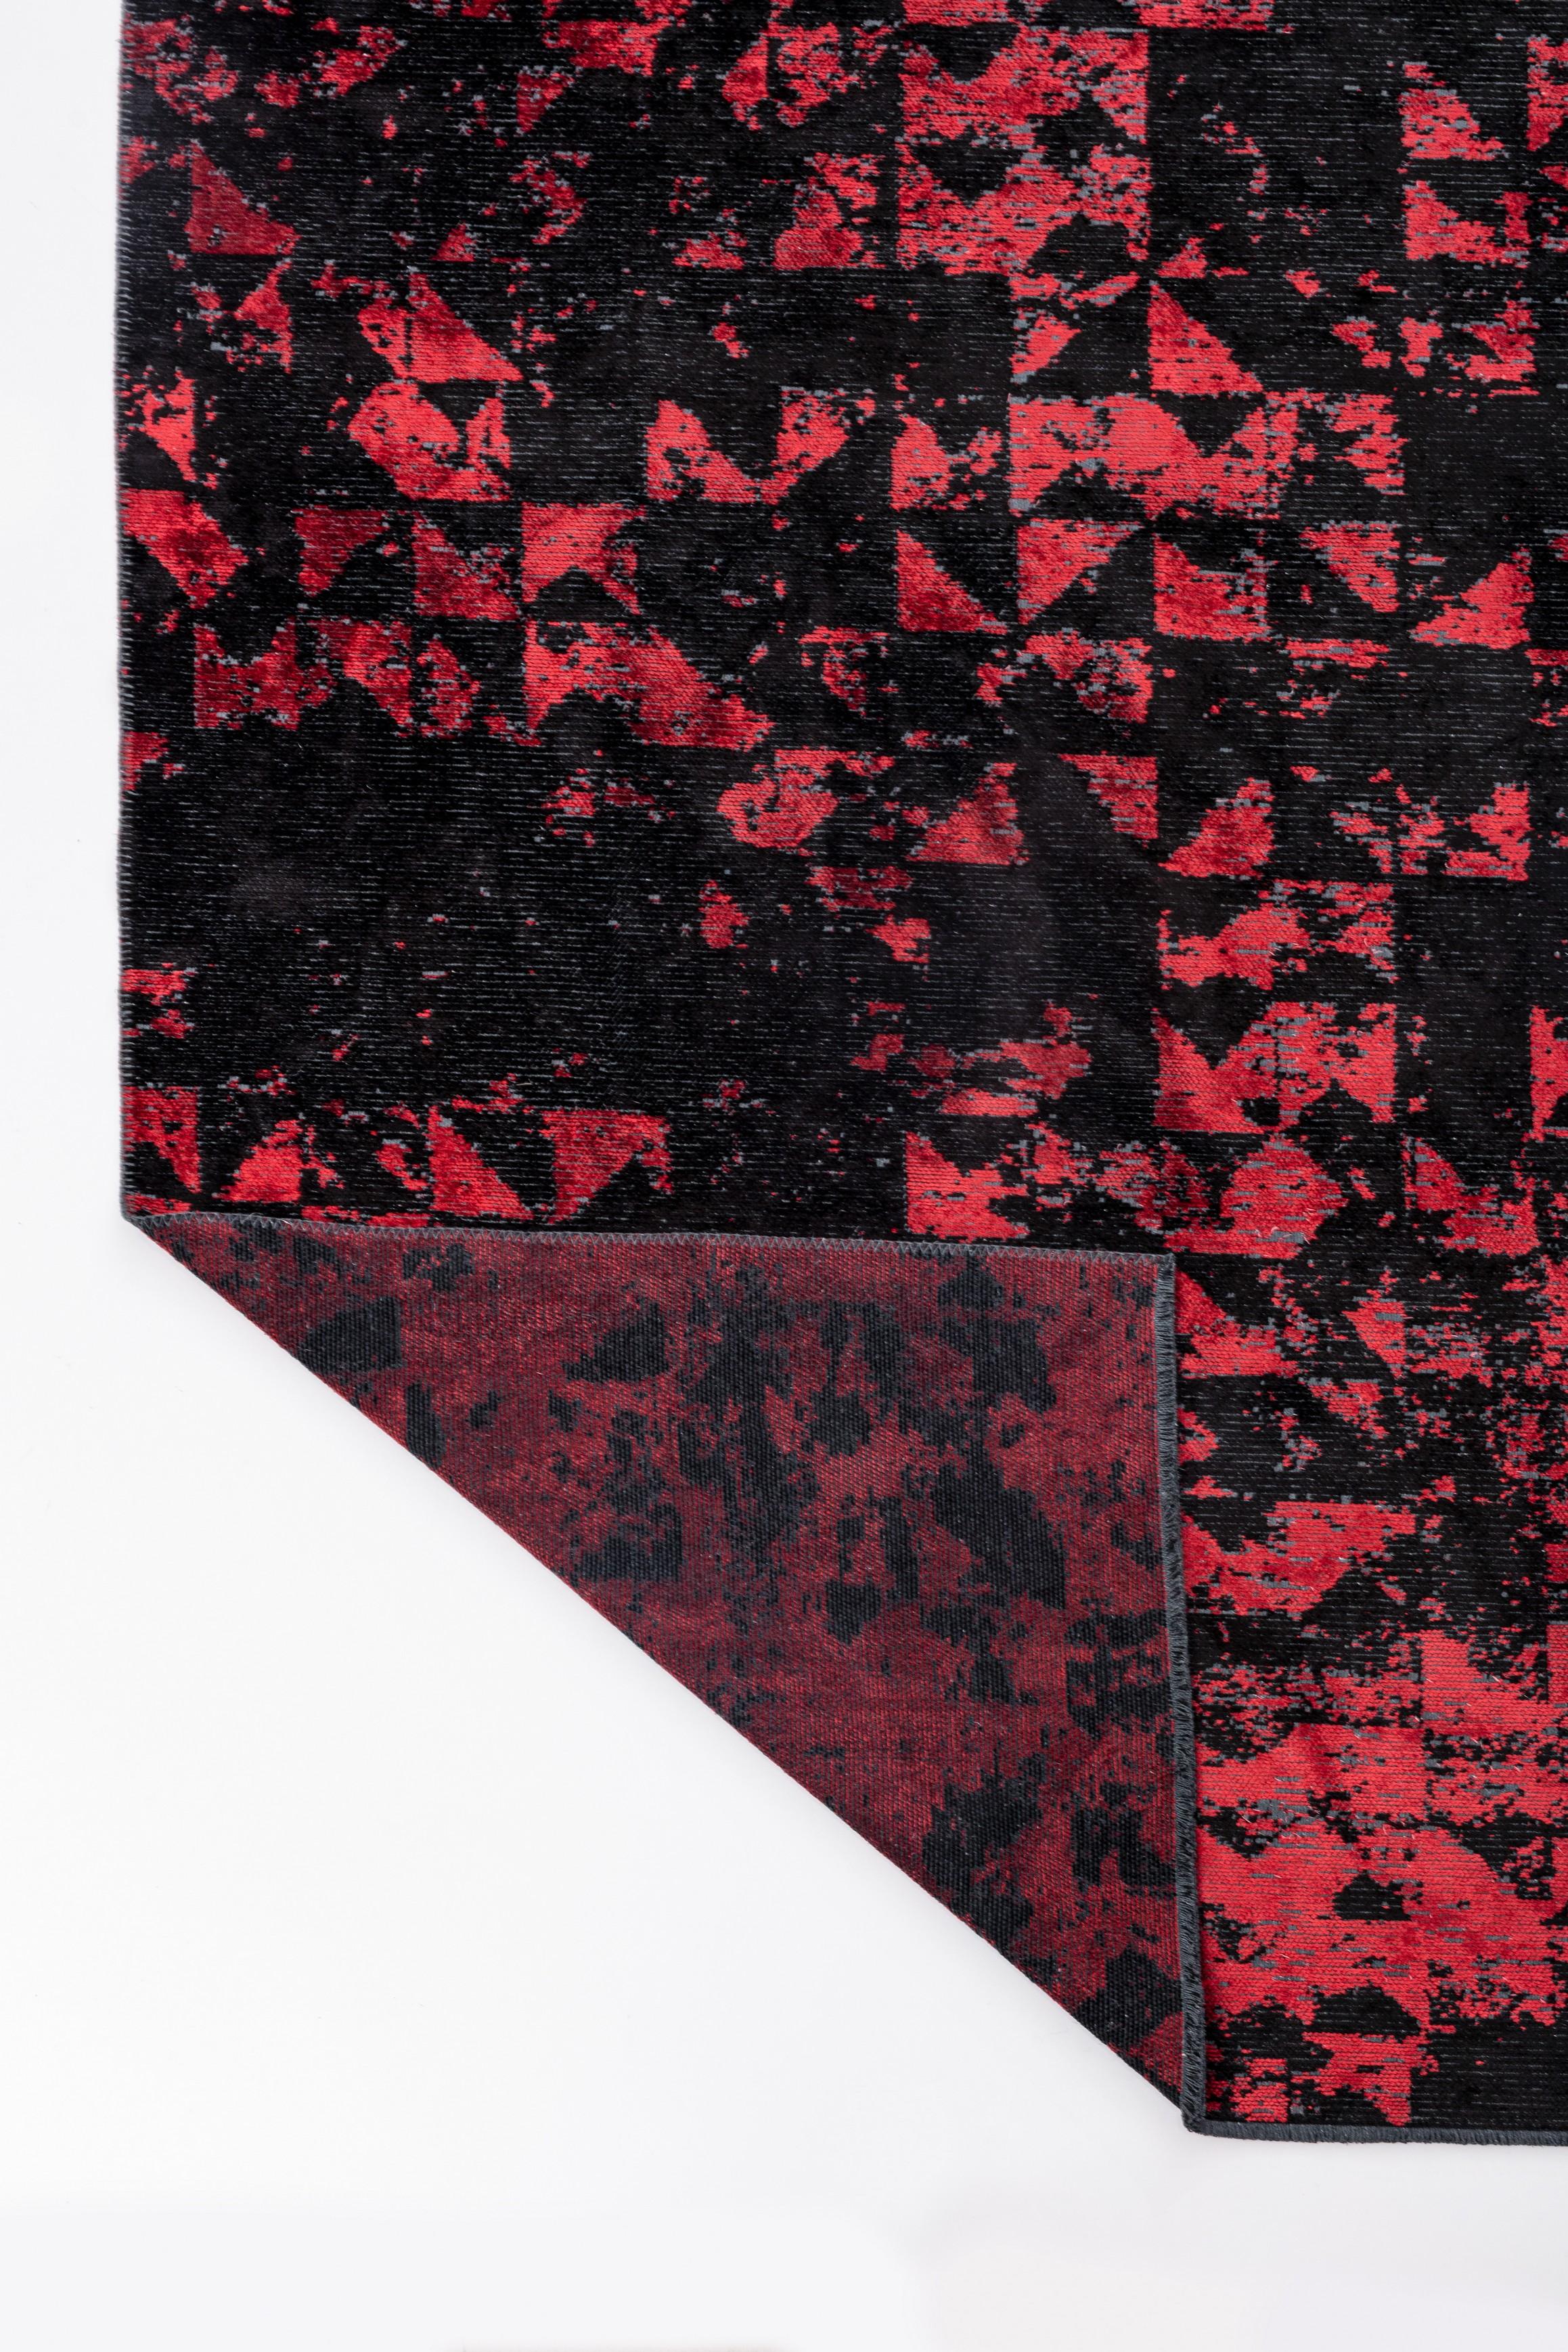 For Sale:  (Red) Modern Camouflage Luxury Hand-Finished Area Rug 3